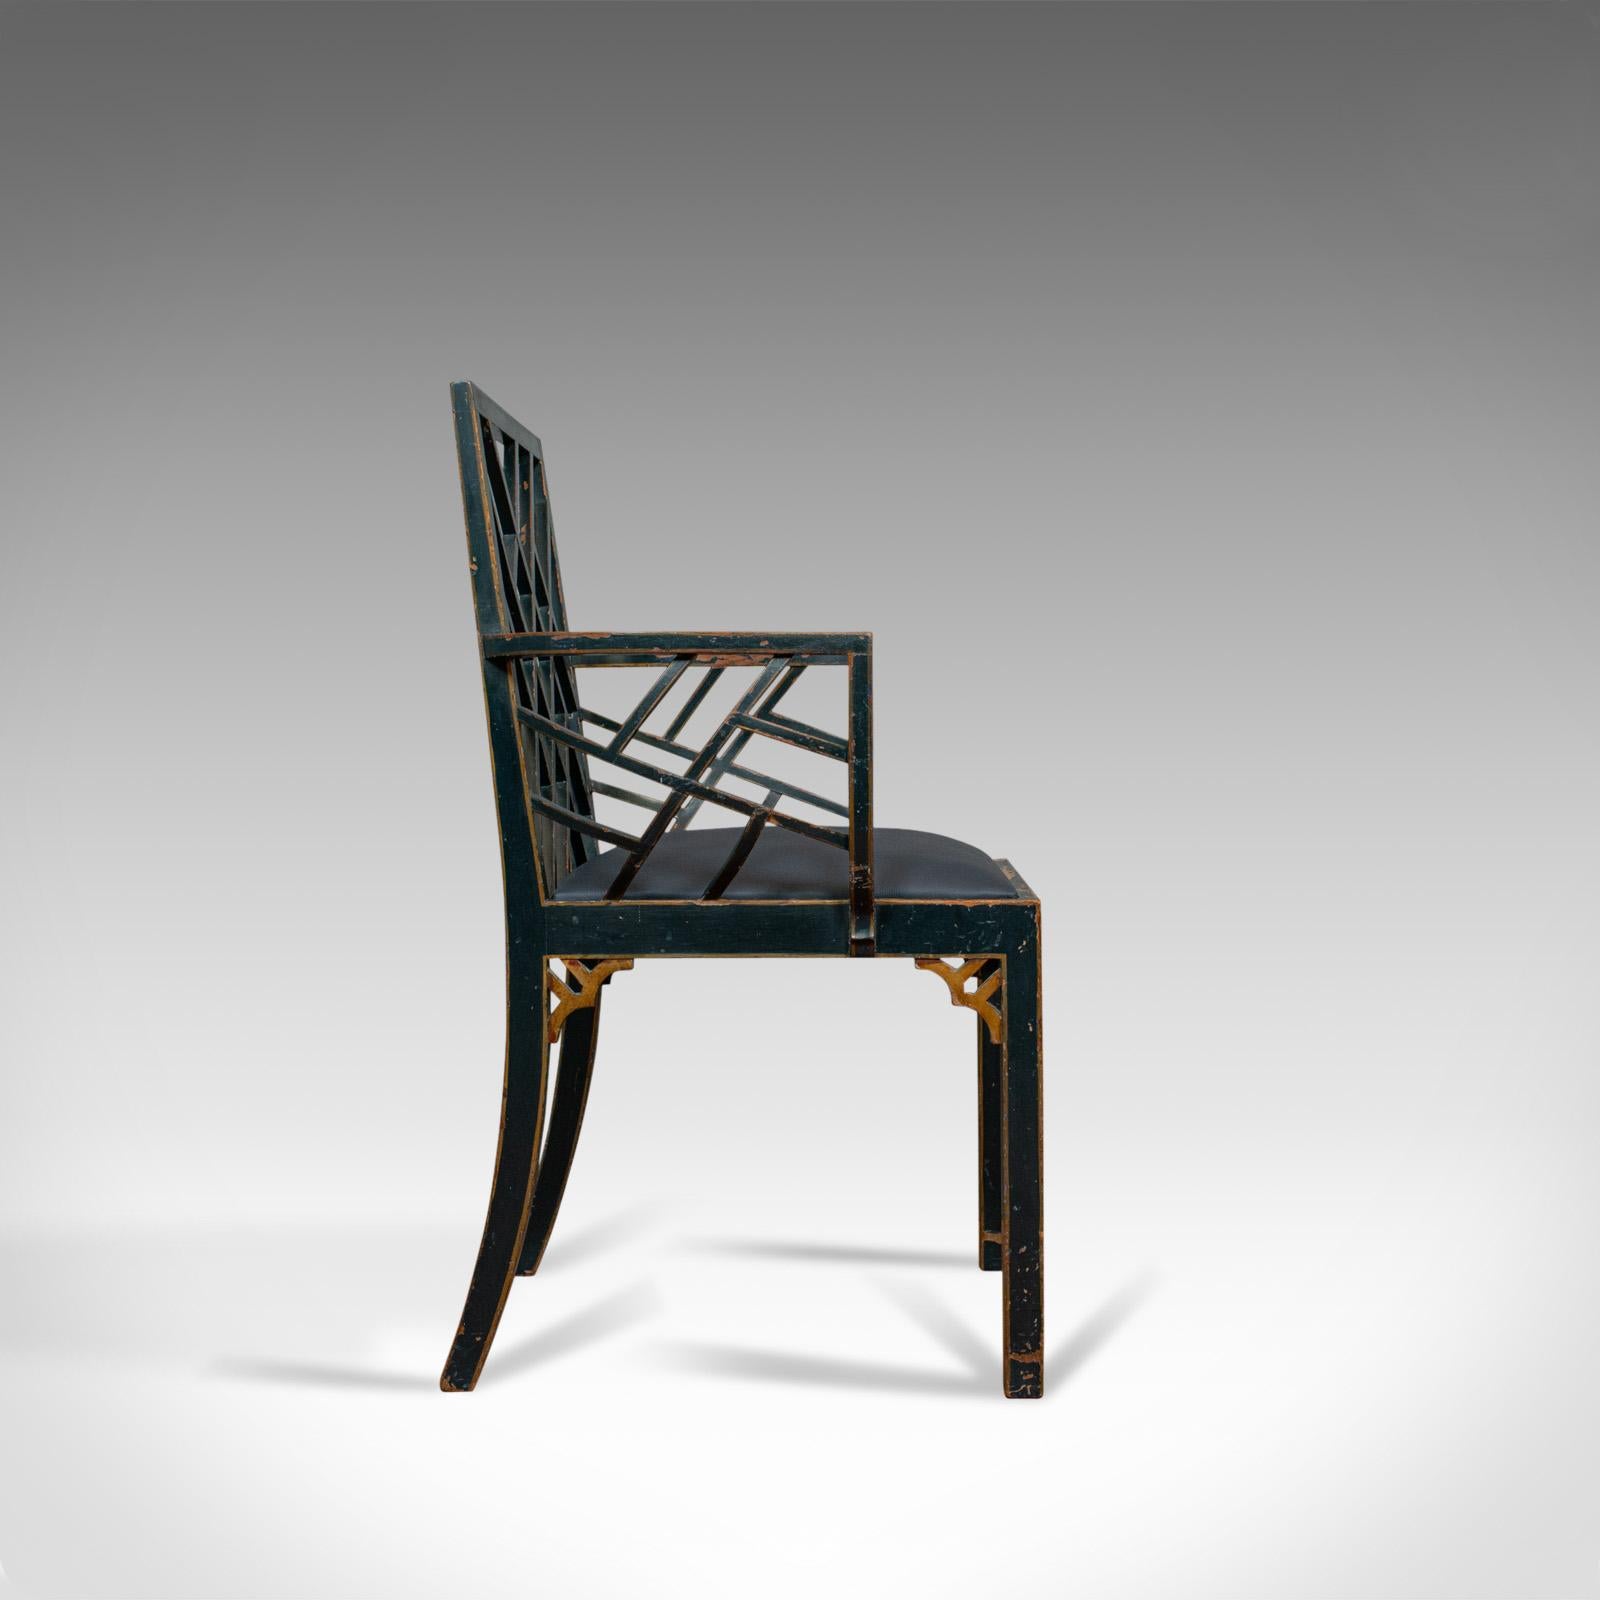 Hand-Painted Antique Birdcage Elbow Chair, English, Painted, Leather, Regency, circa 1820